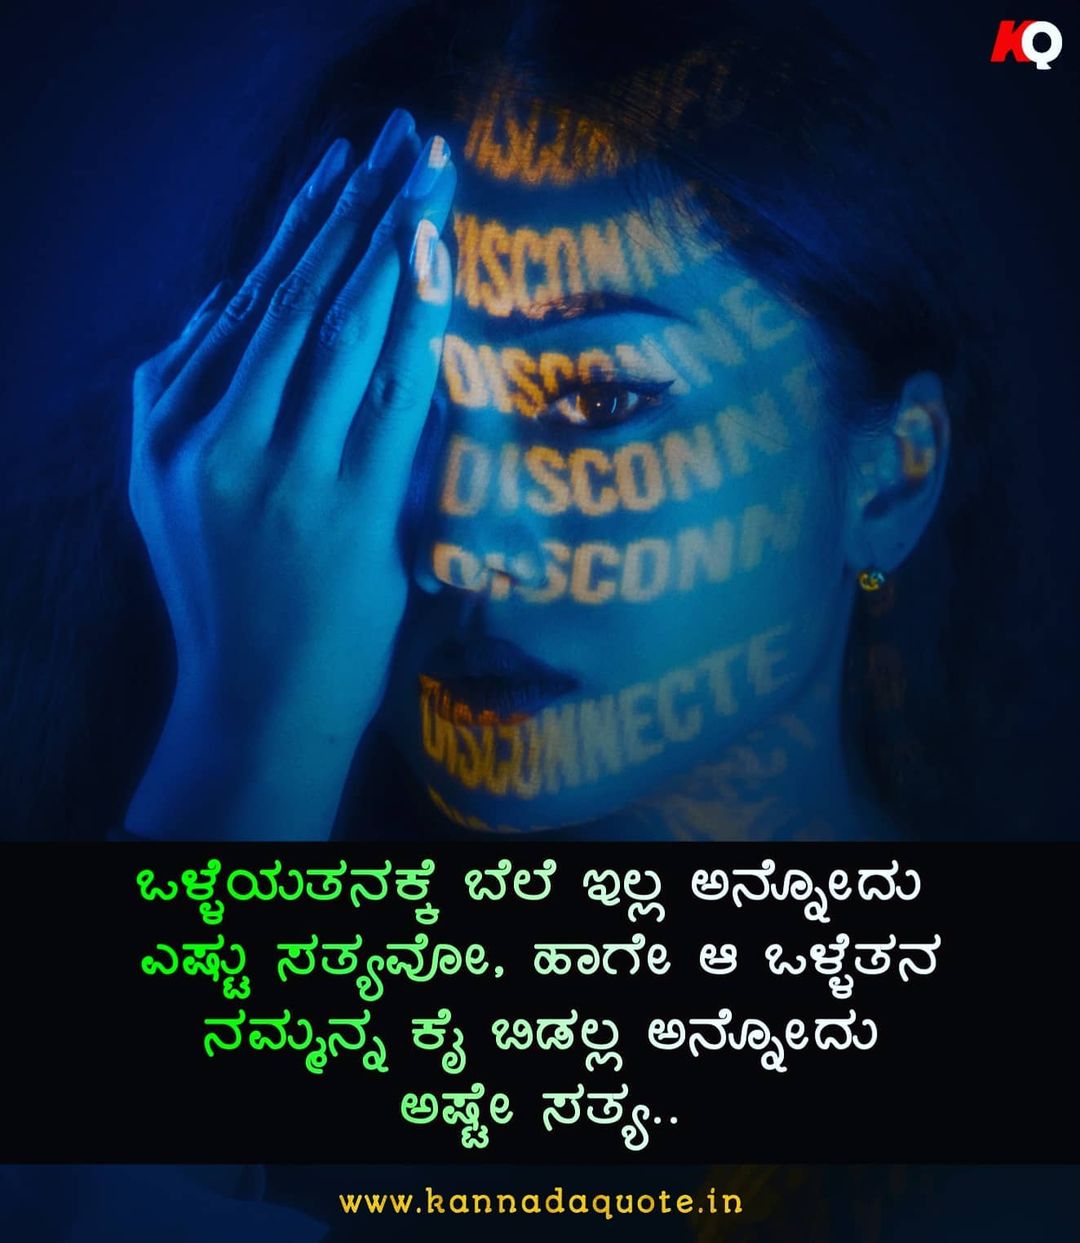 Kannada good night messages quotes